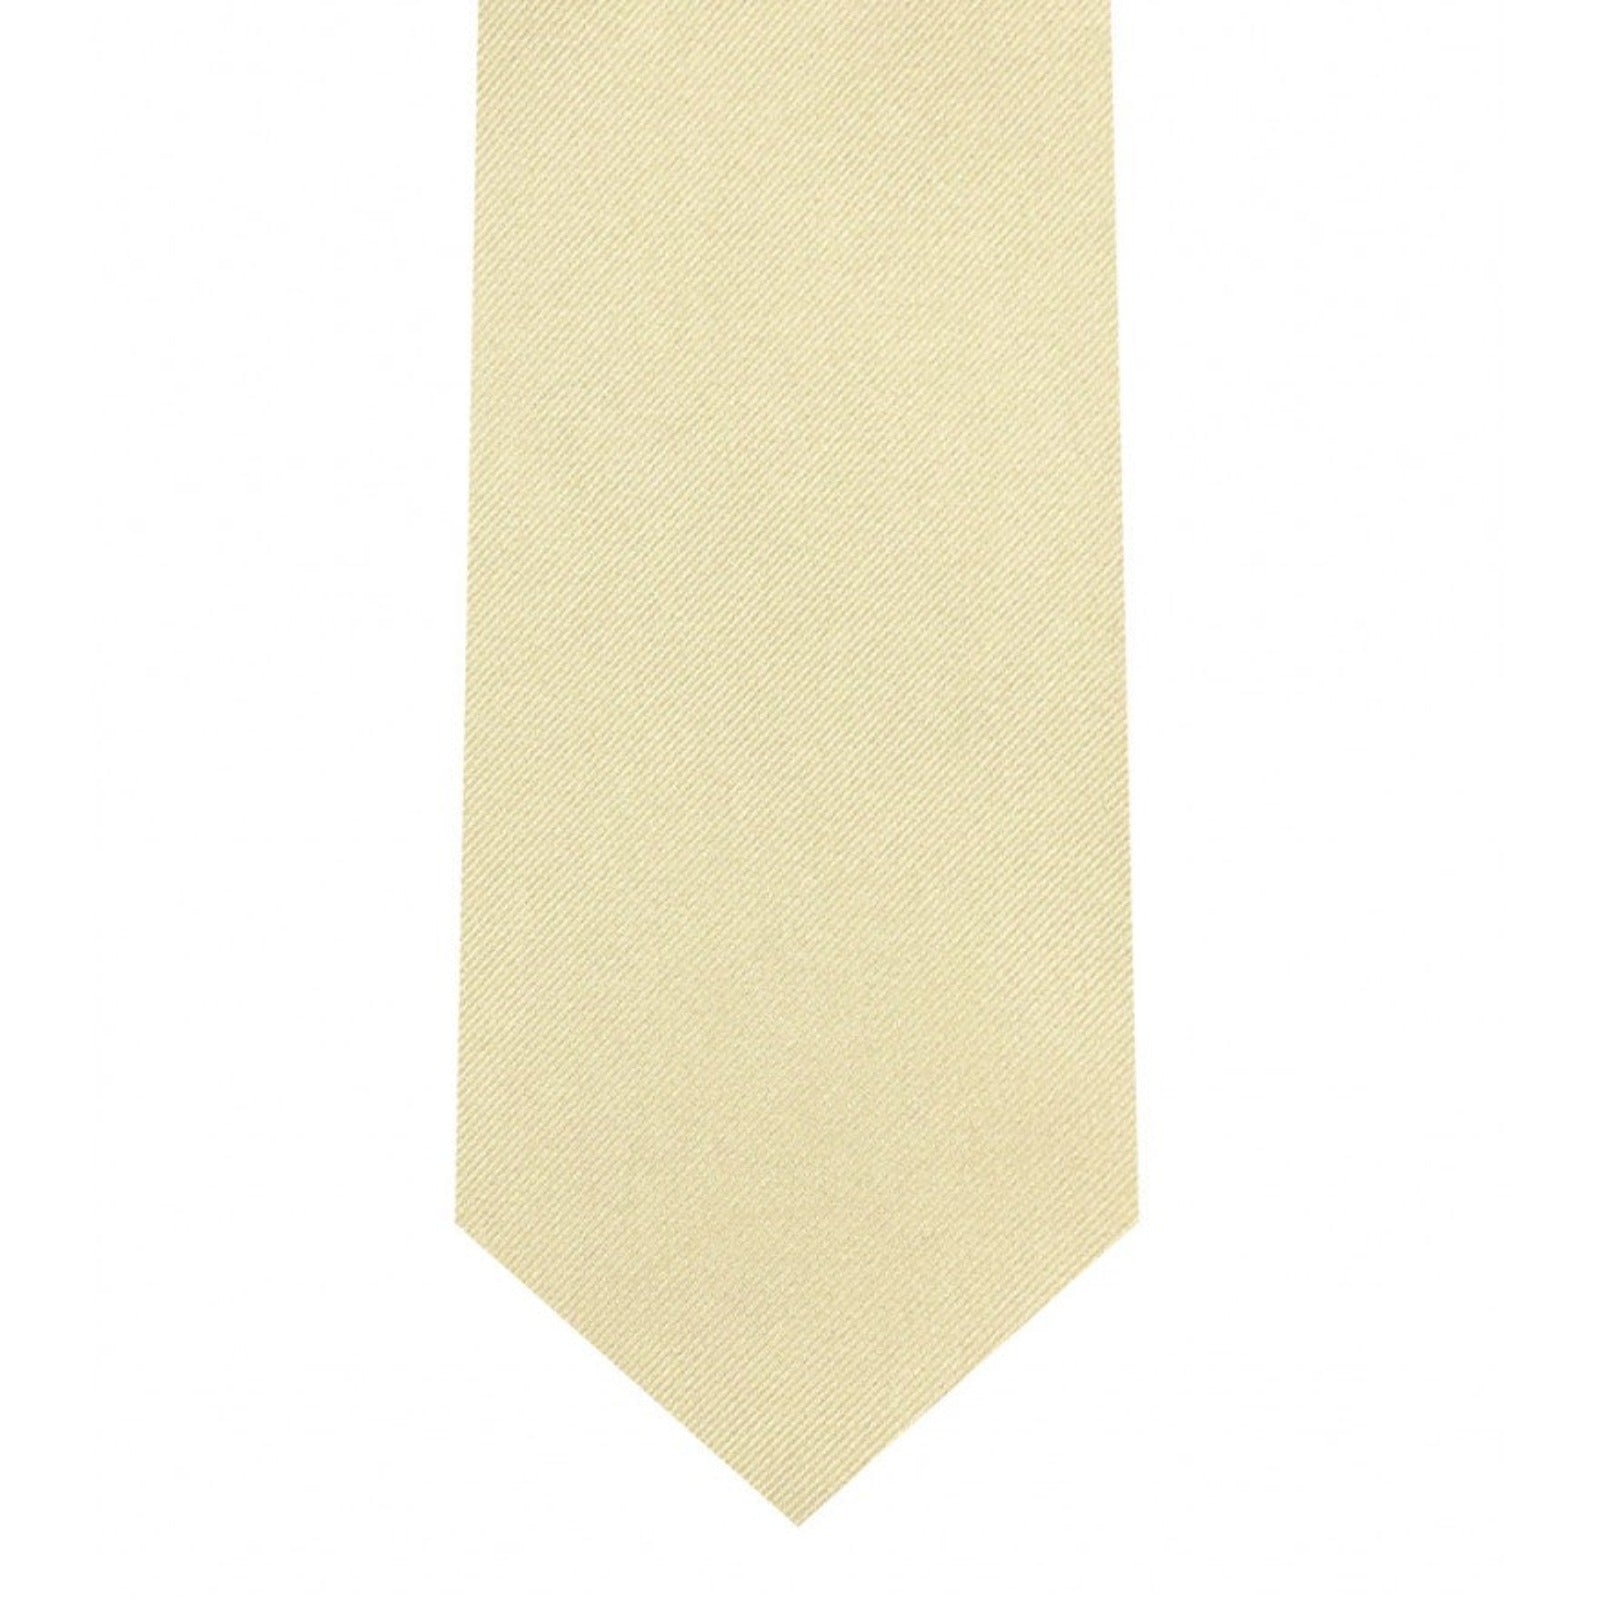 Classic Champagne Tie Skinny width 2.75 inches With Matching Pocket Square | KCT Menswear 